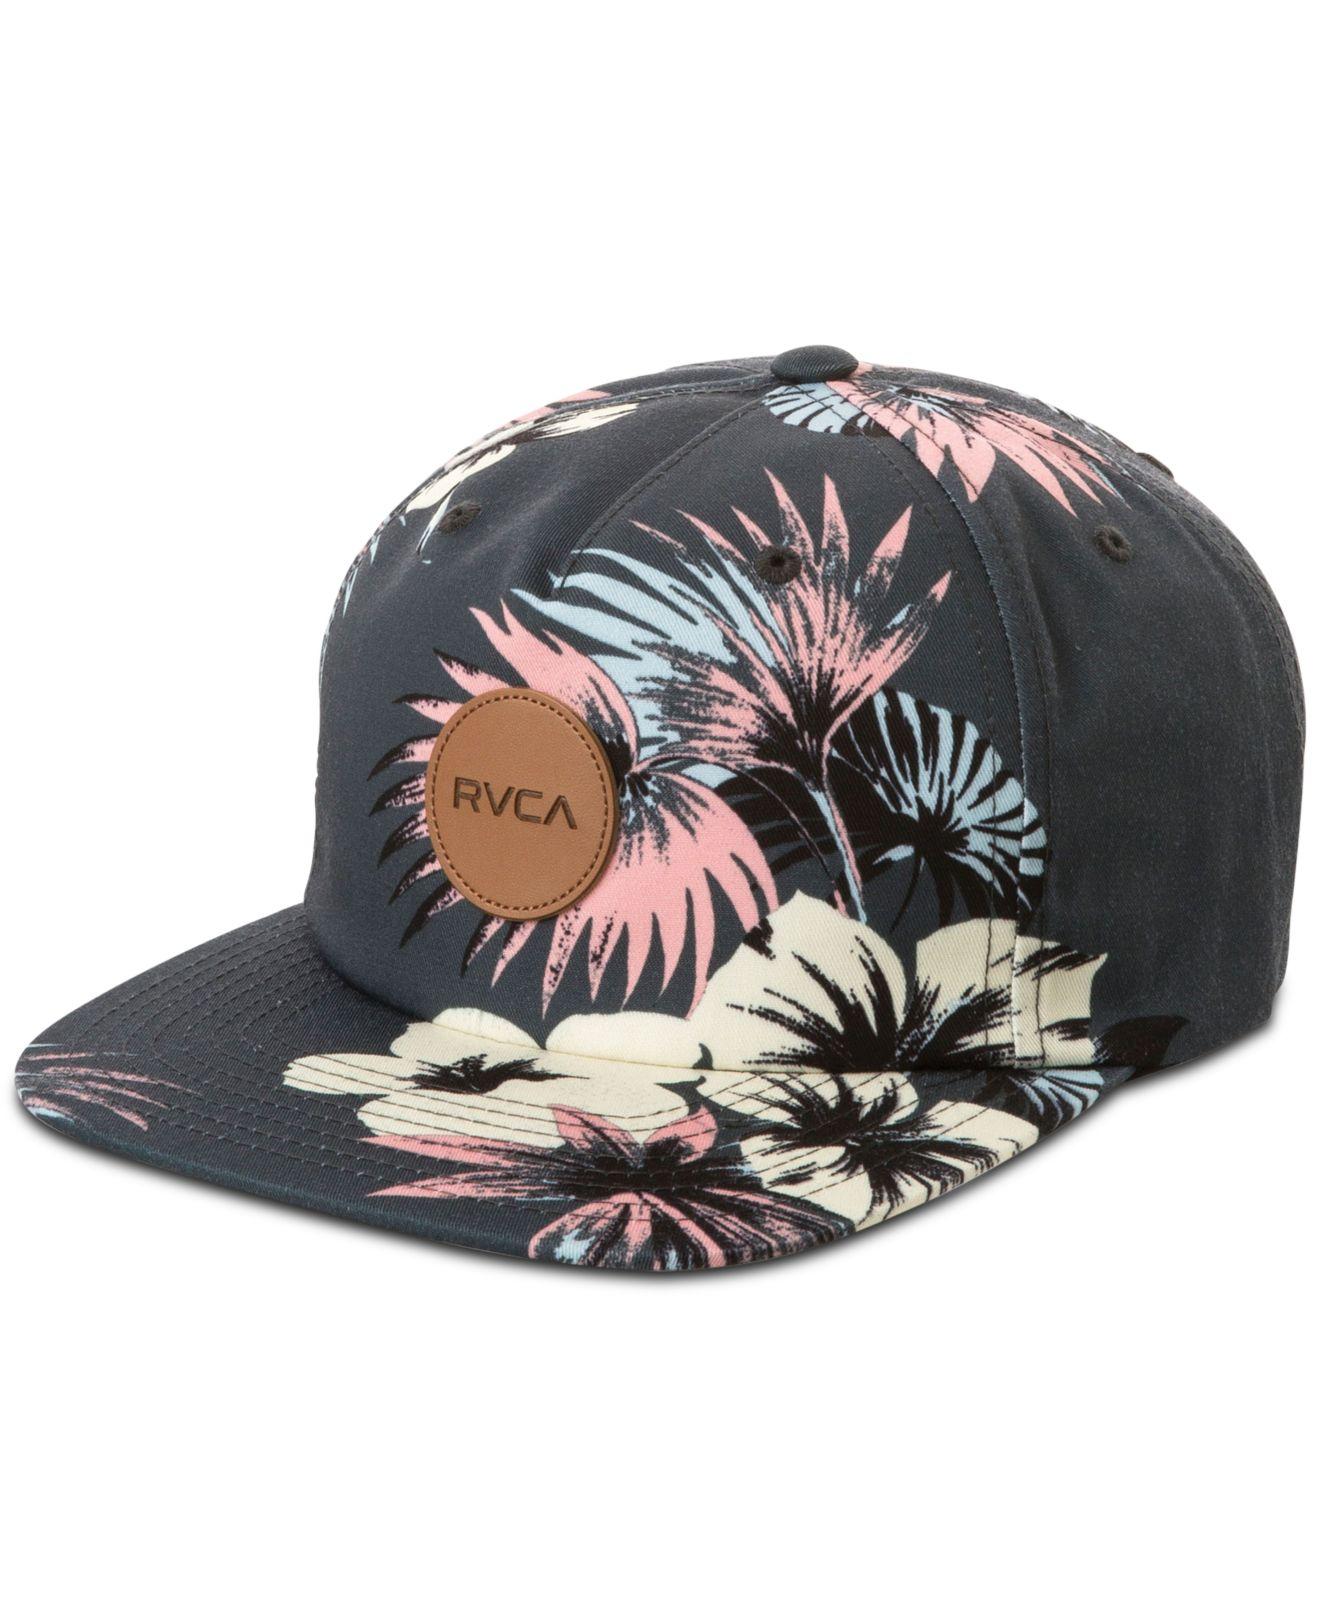 RVCA Romeo Floral Snapback Hat in Black for Men - Save 25% - Lyst